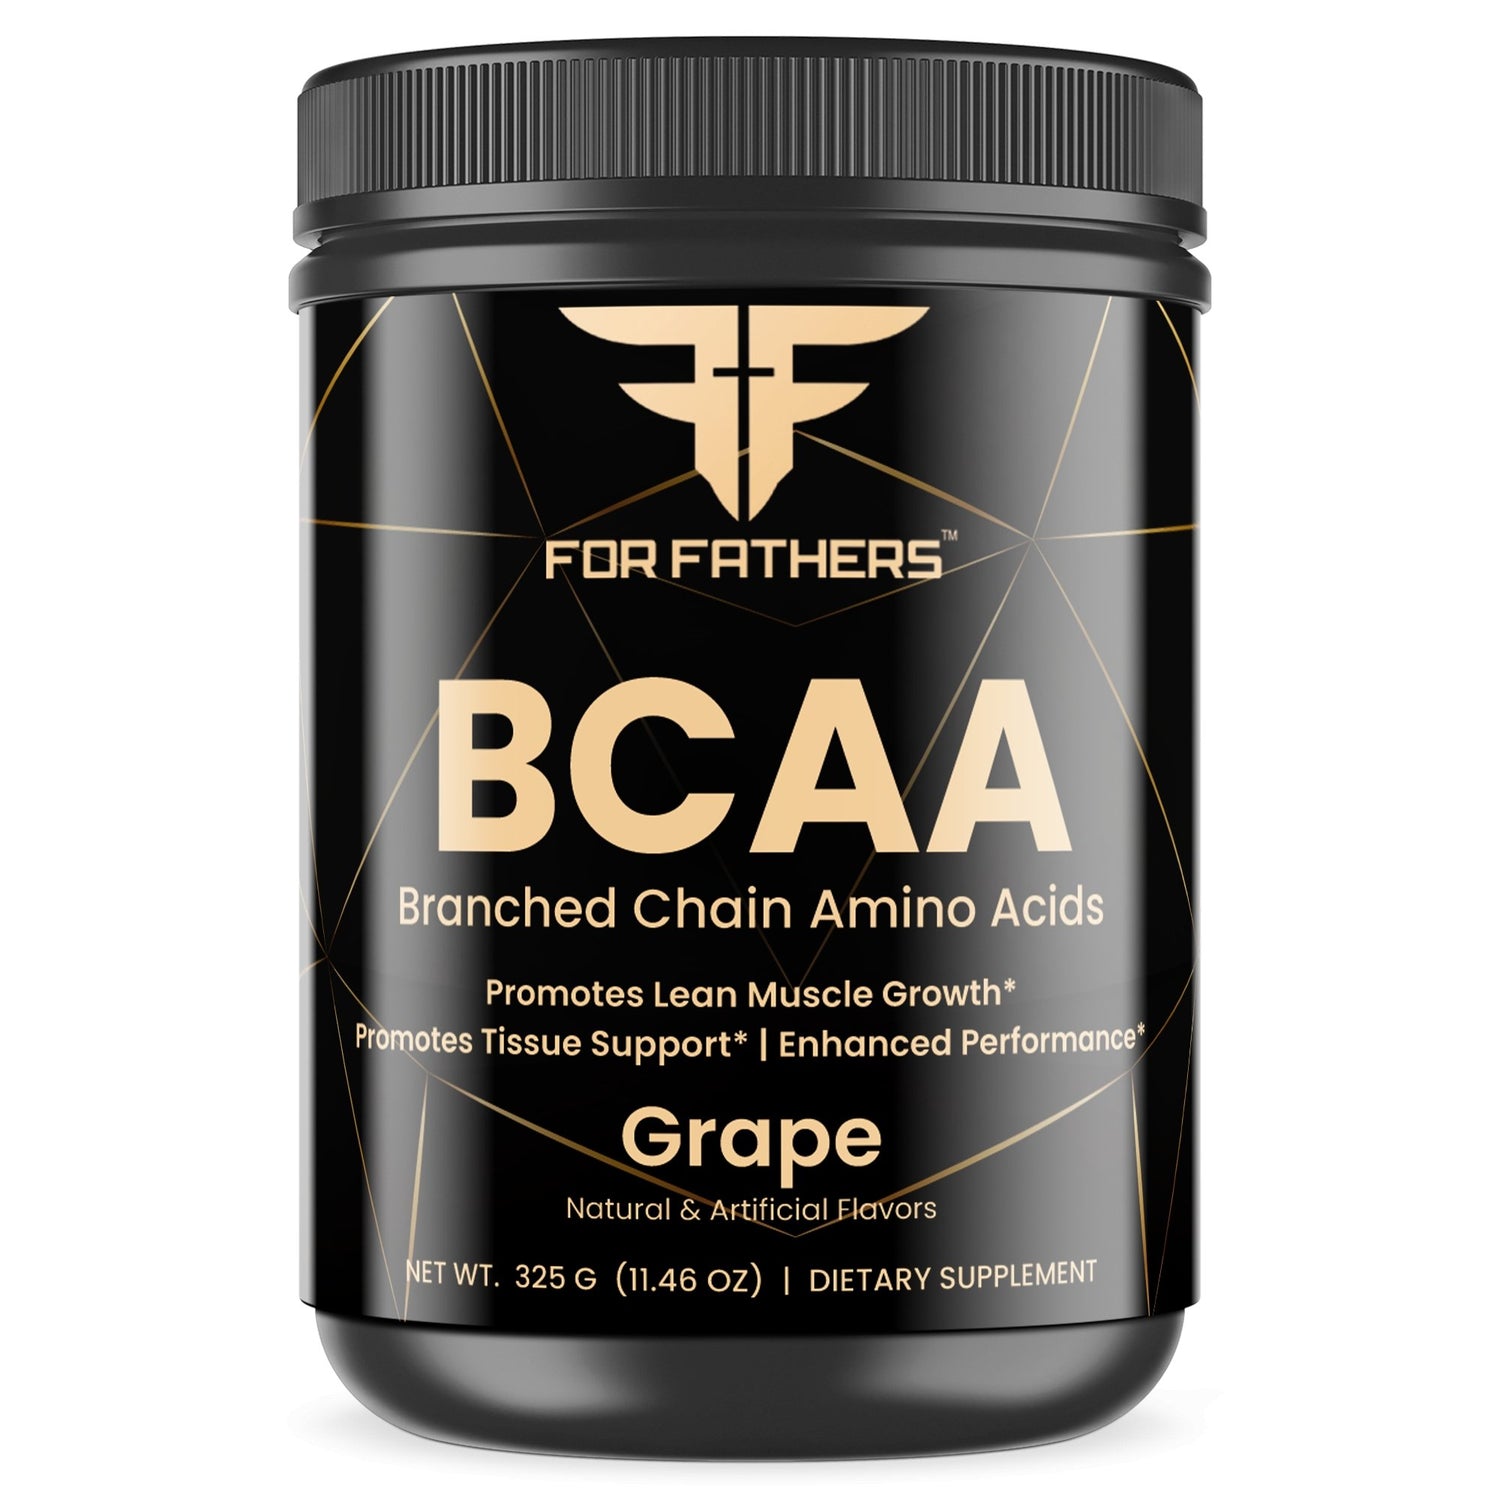 Grape-Flavored BCAA - For Fathers Fitness